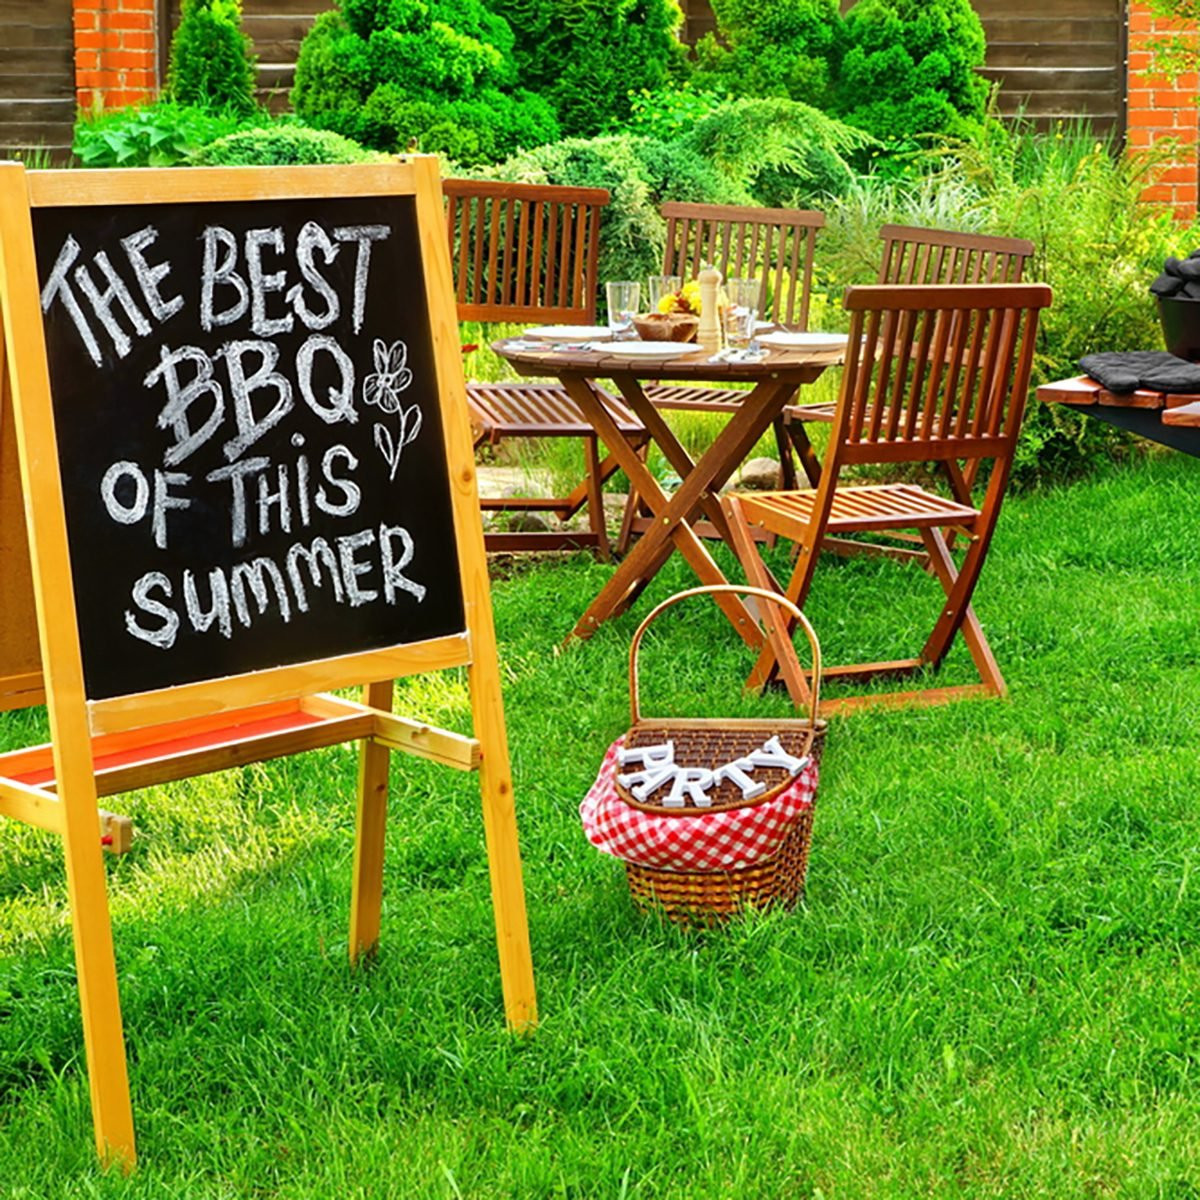 Summer Barbecue Party Ideas
 11 Insanely Smart Ideas for Your Backyard Party